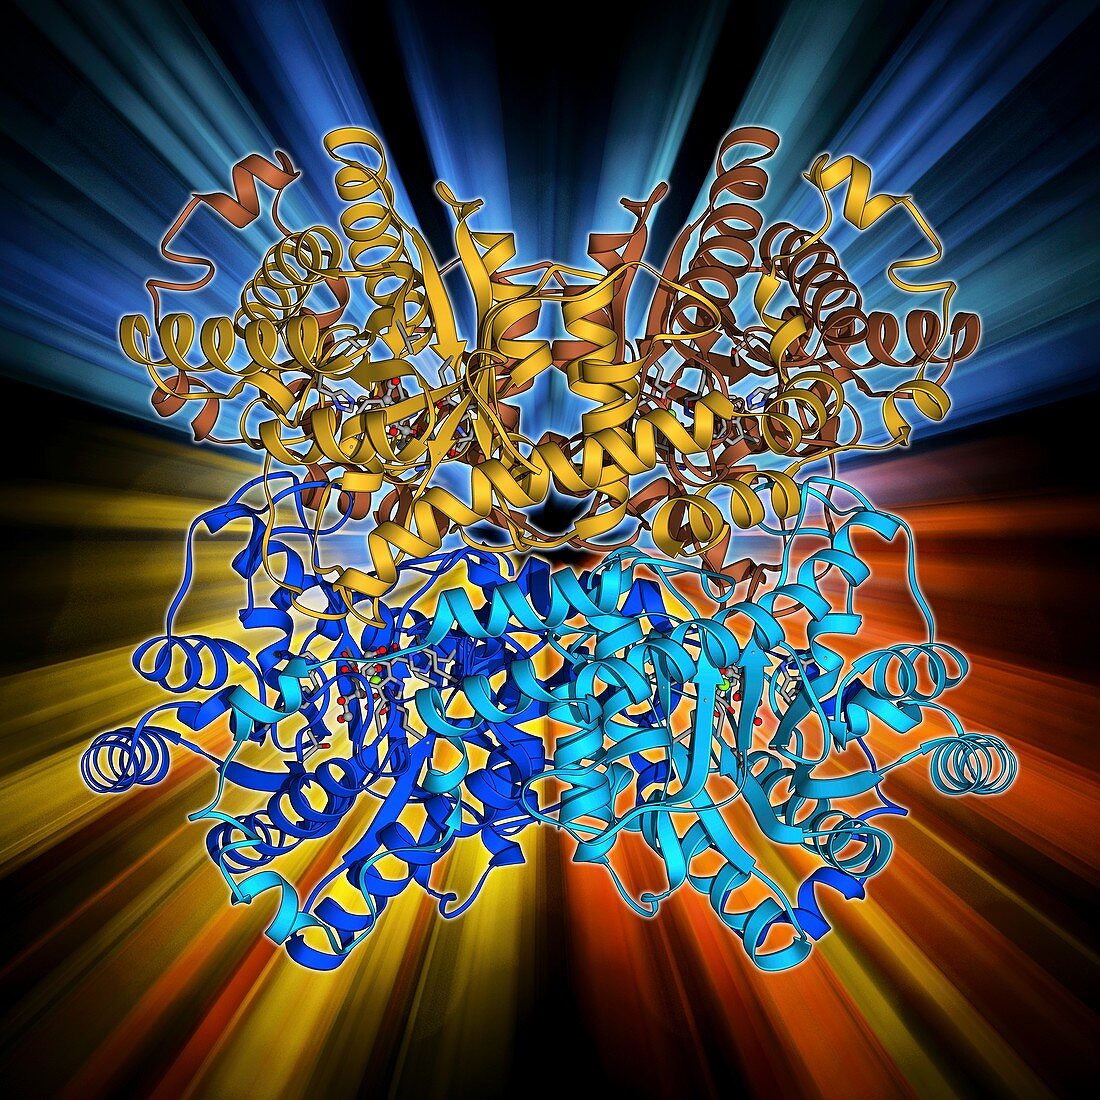 Xylose isomerase complex